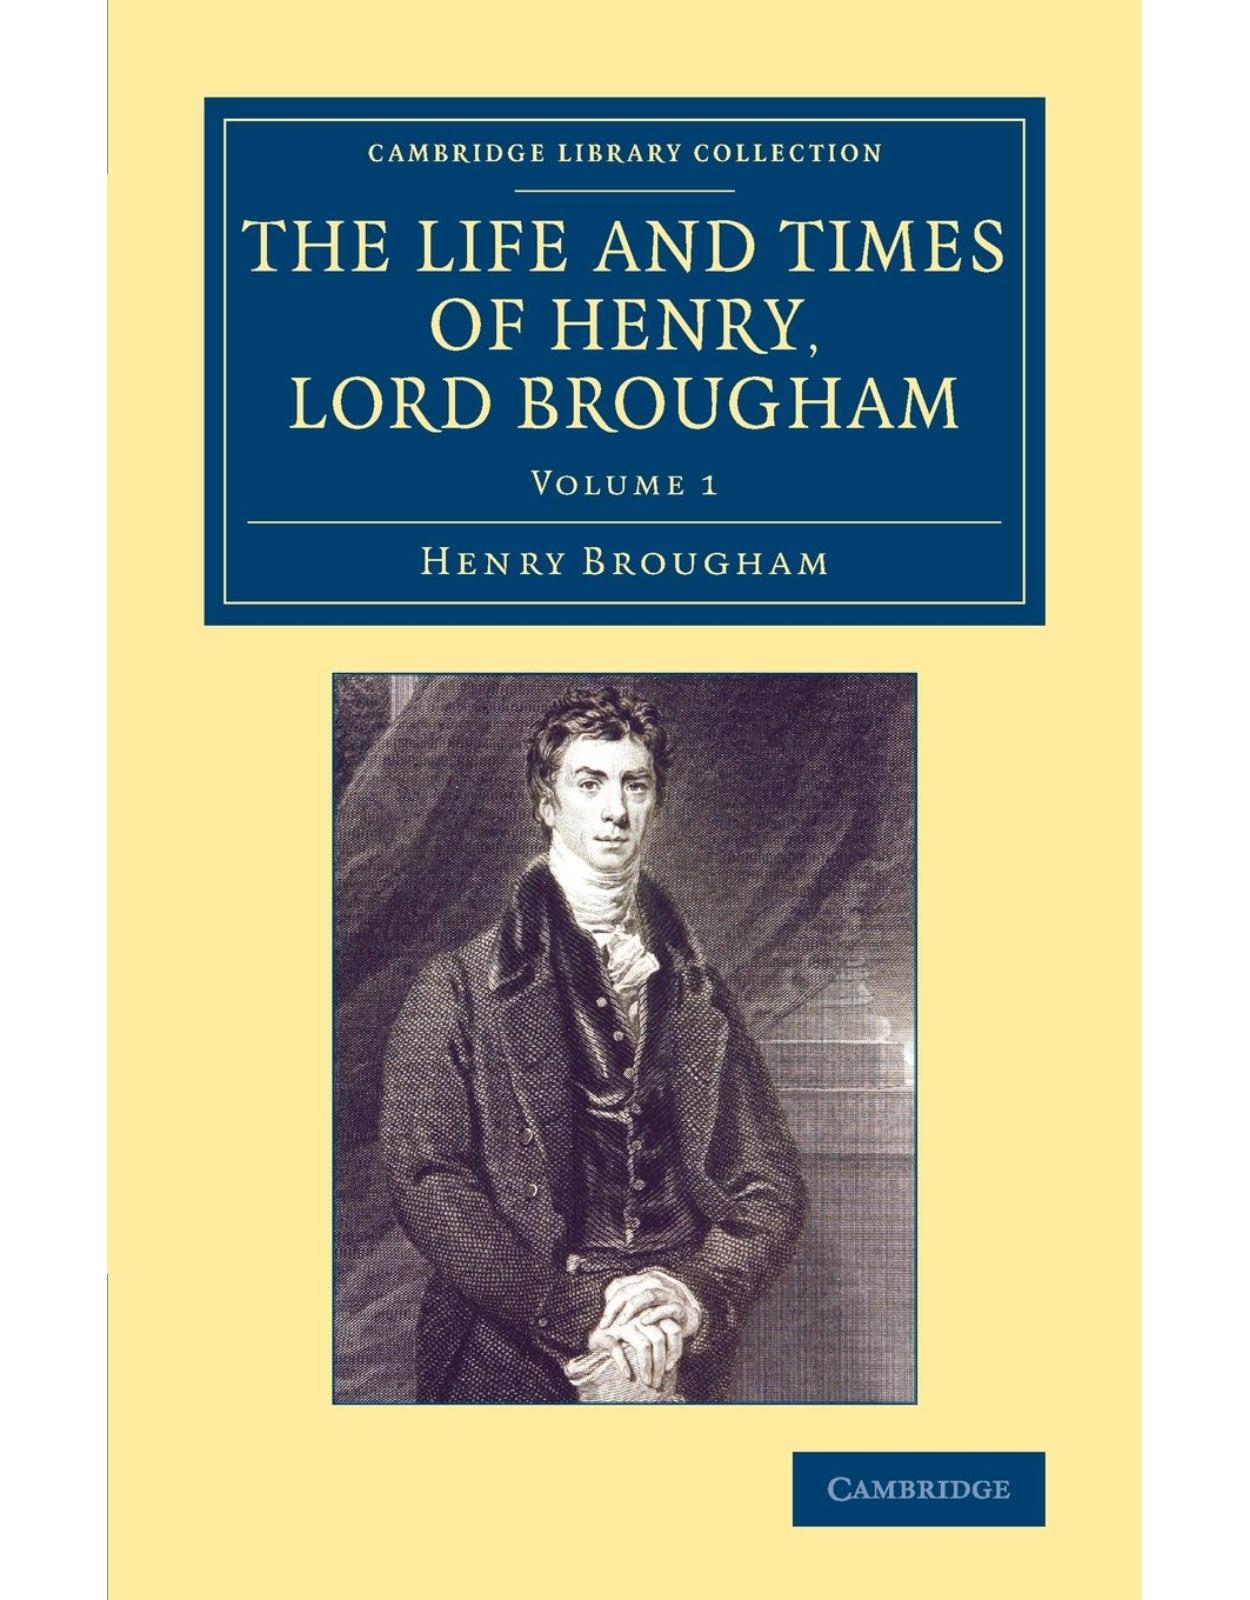 The Life and Times of Henry Lord Brougham 3 Volume Set: The Life and Times of Henry Lord Brougham: Written by Himself: Volume 3 (Cambridge Library Collection - British and Irish History, 19th Century)